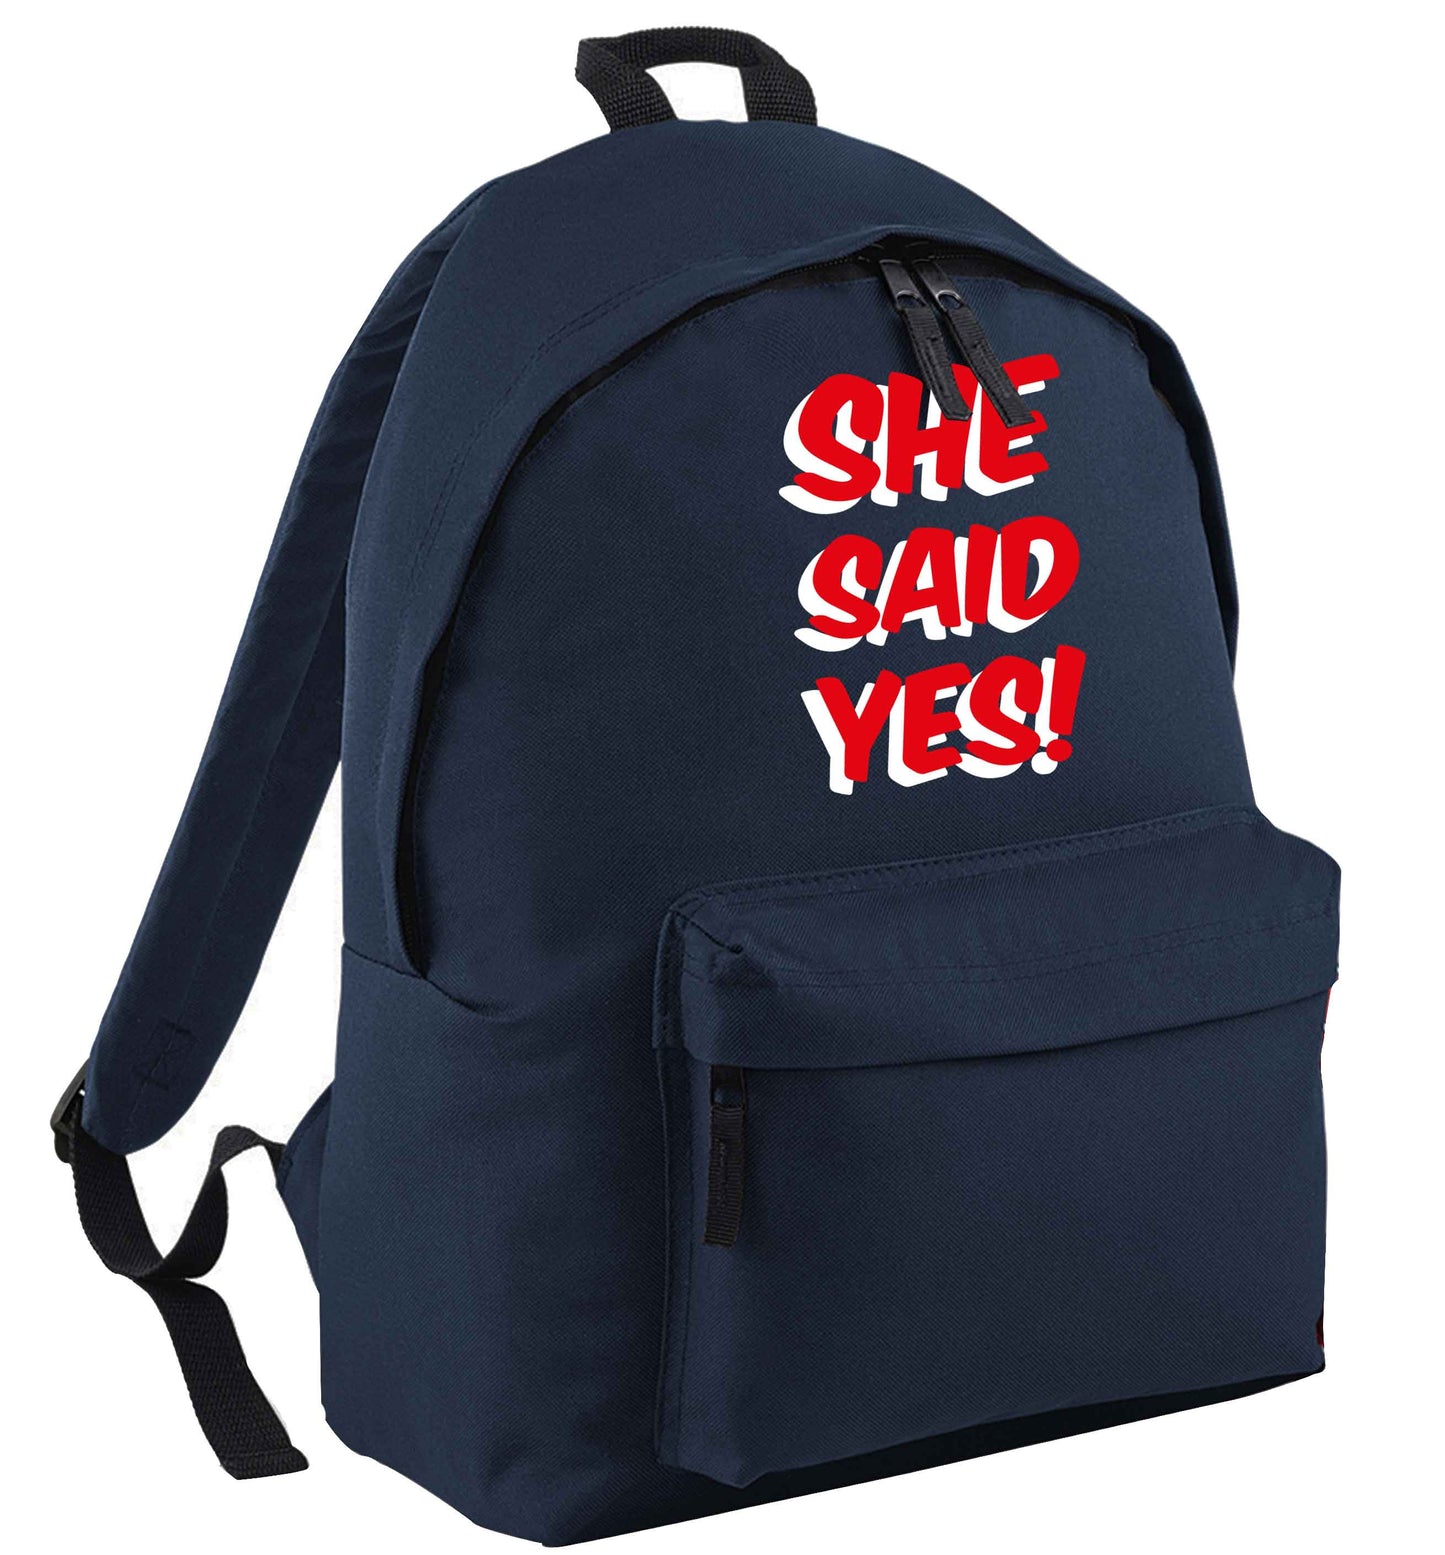 She said yes navy adults backpack